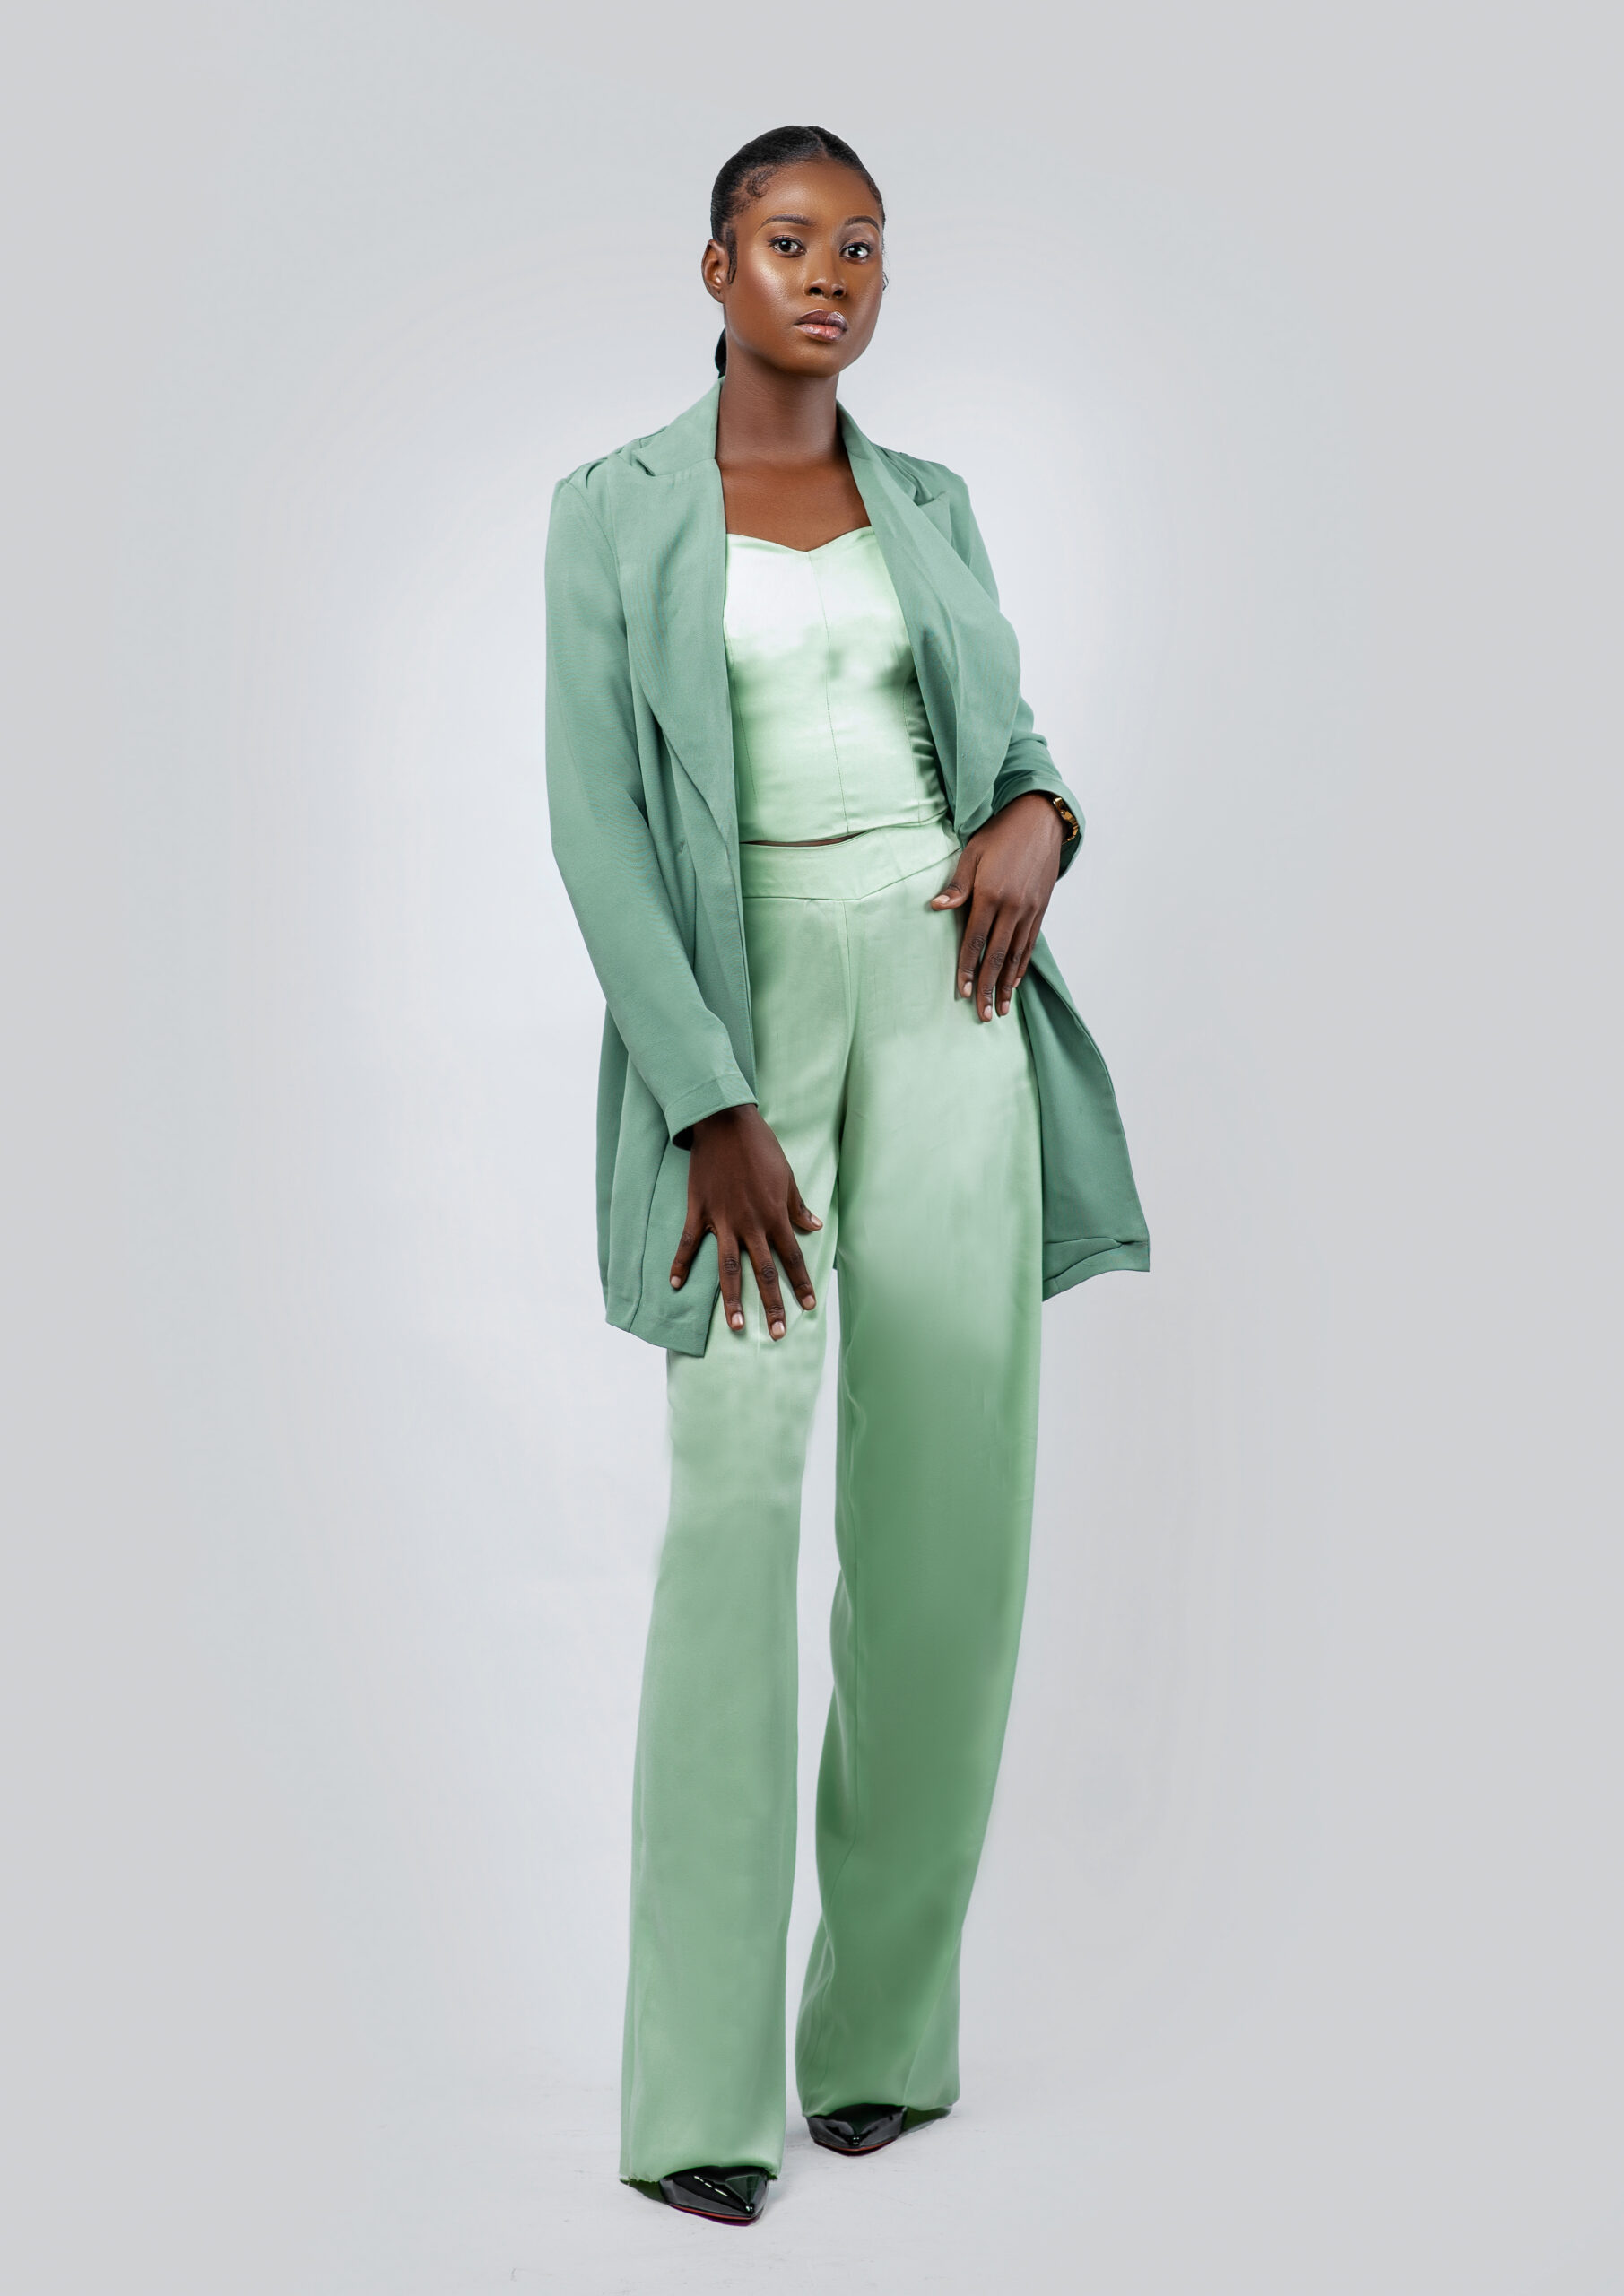 Check Out The All-Green ZALZA 2023 Collection From Faith Florence Obot ...